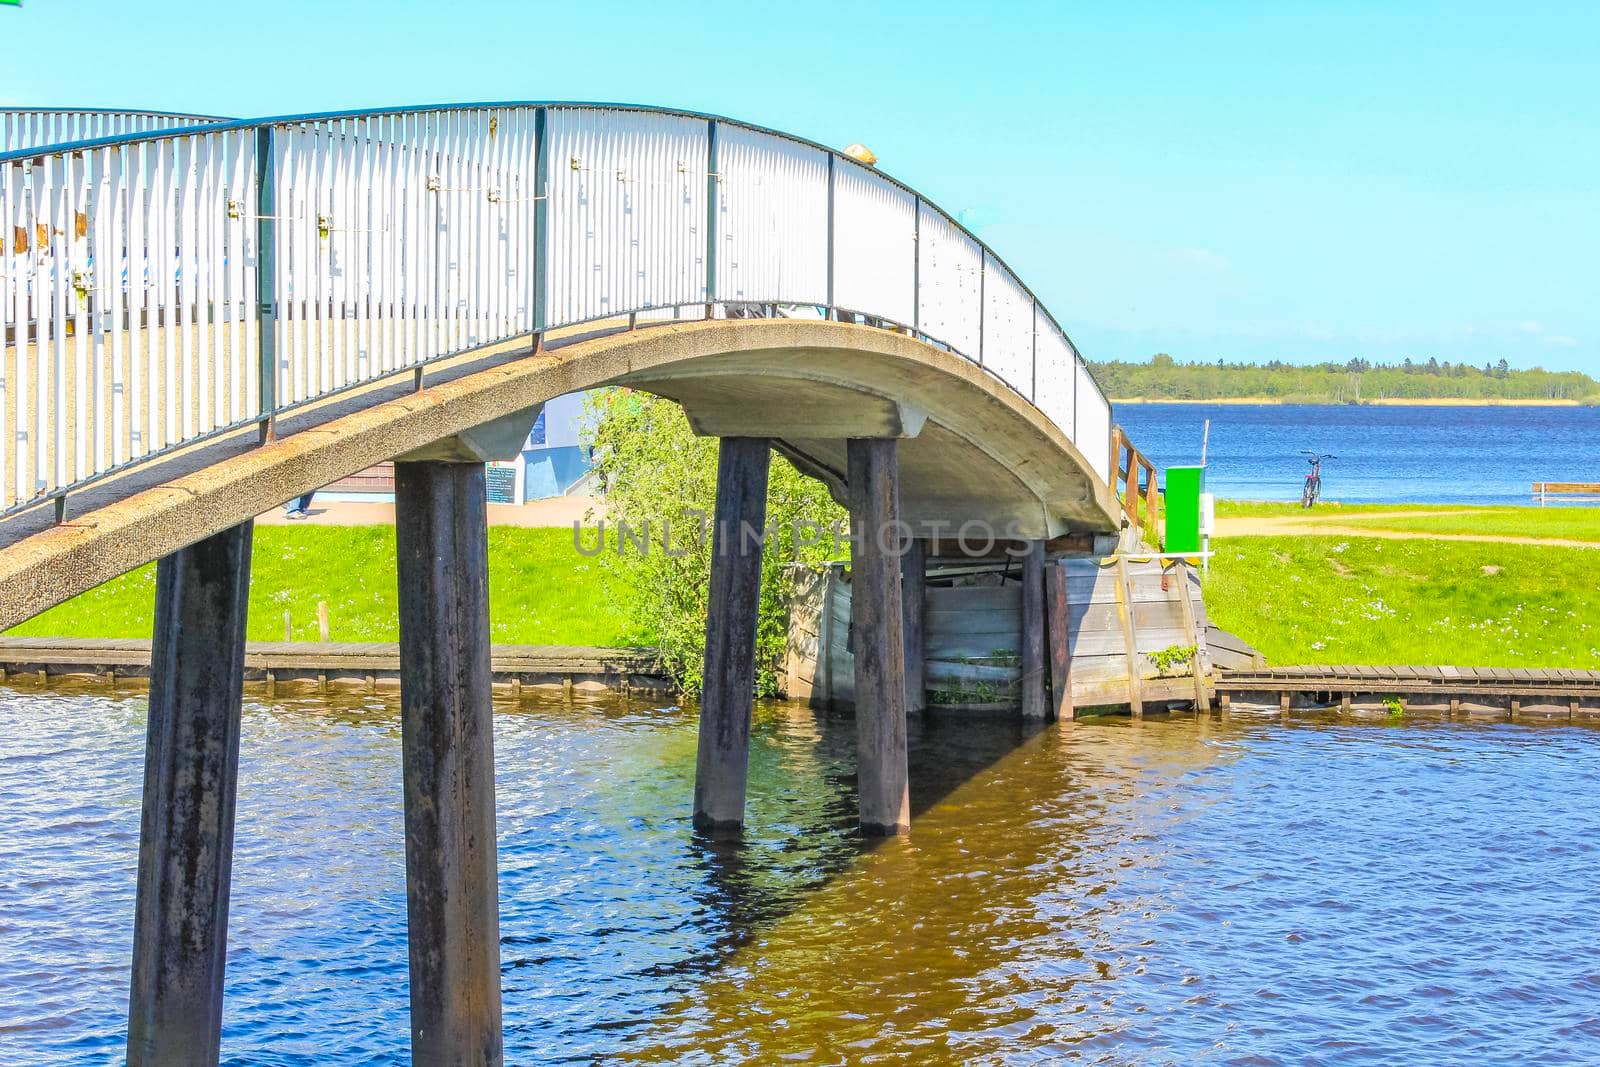 Bad Bederkesa Lake See bridge on sunny day and natural landscape in Geestland Cuxhaven Lower Saxony Germany.